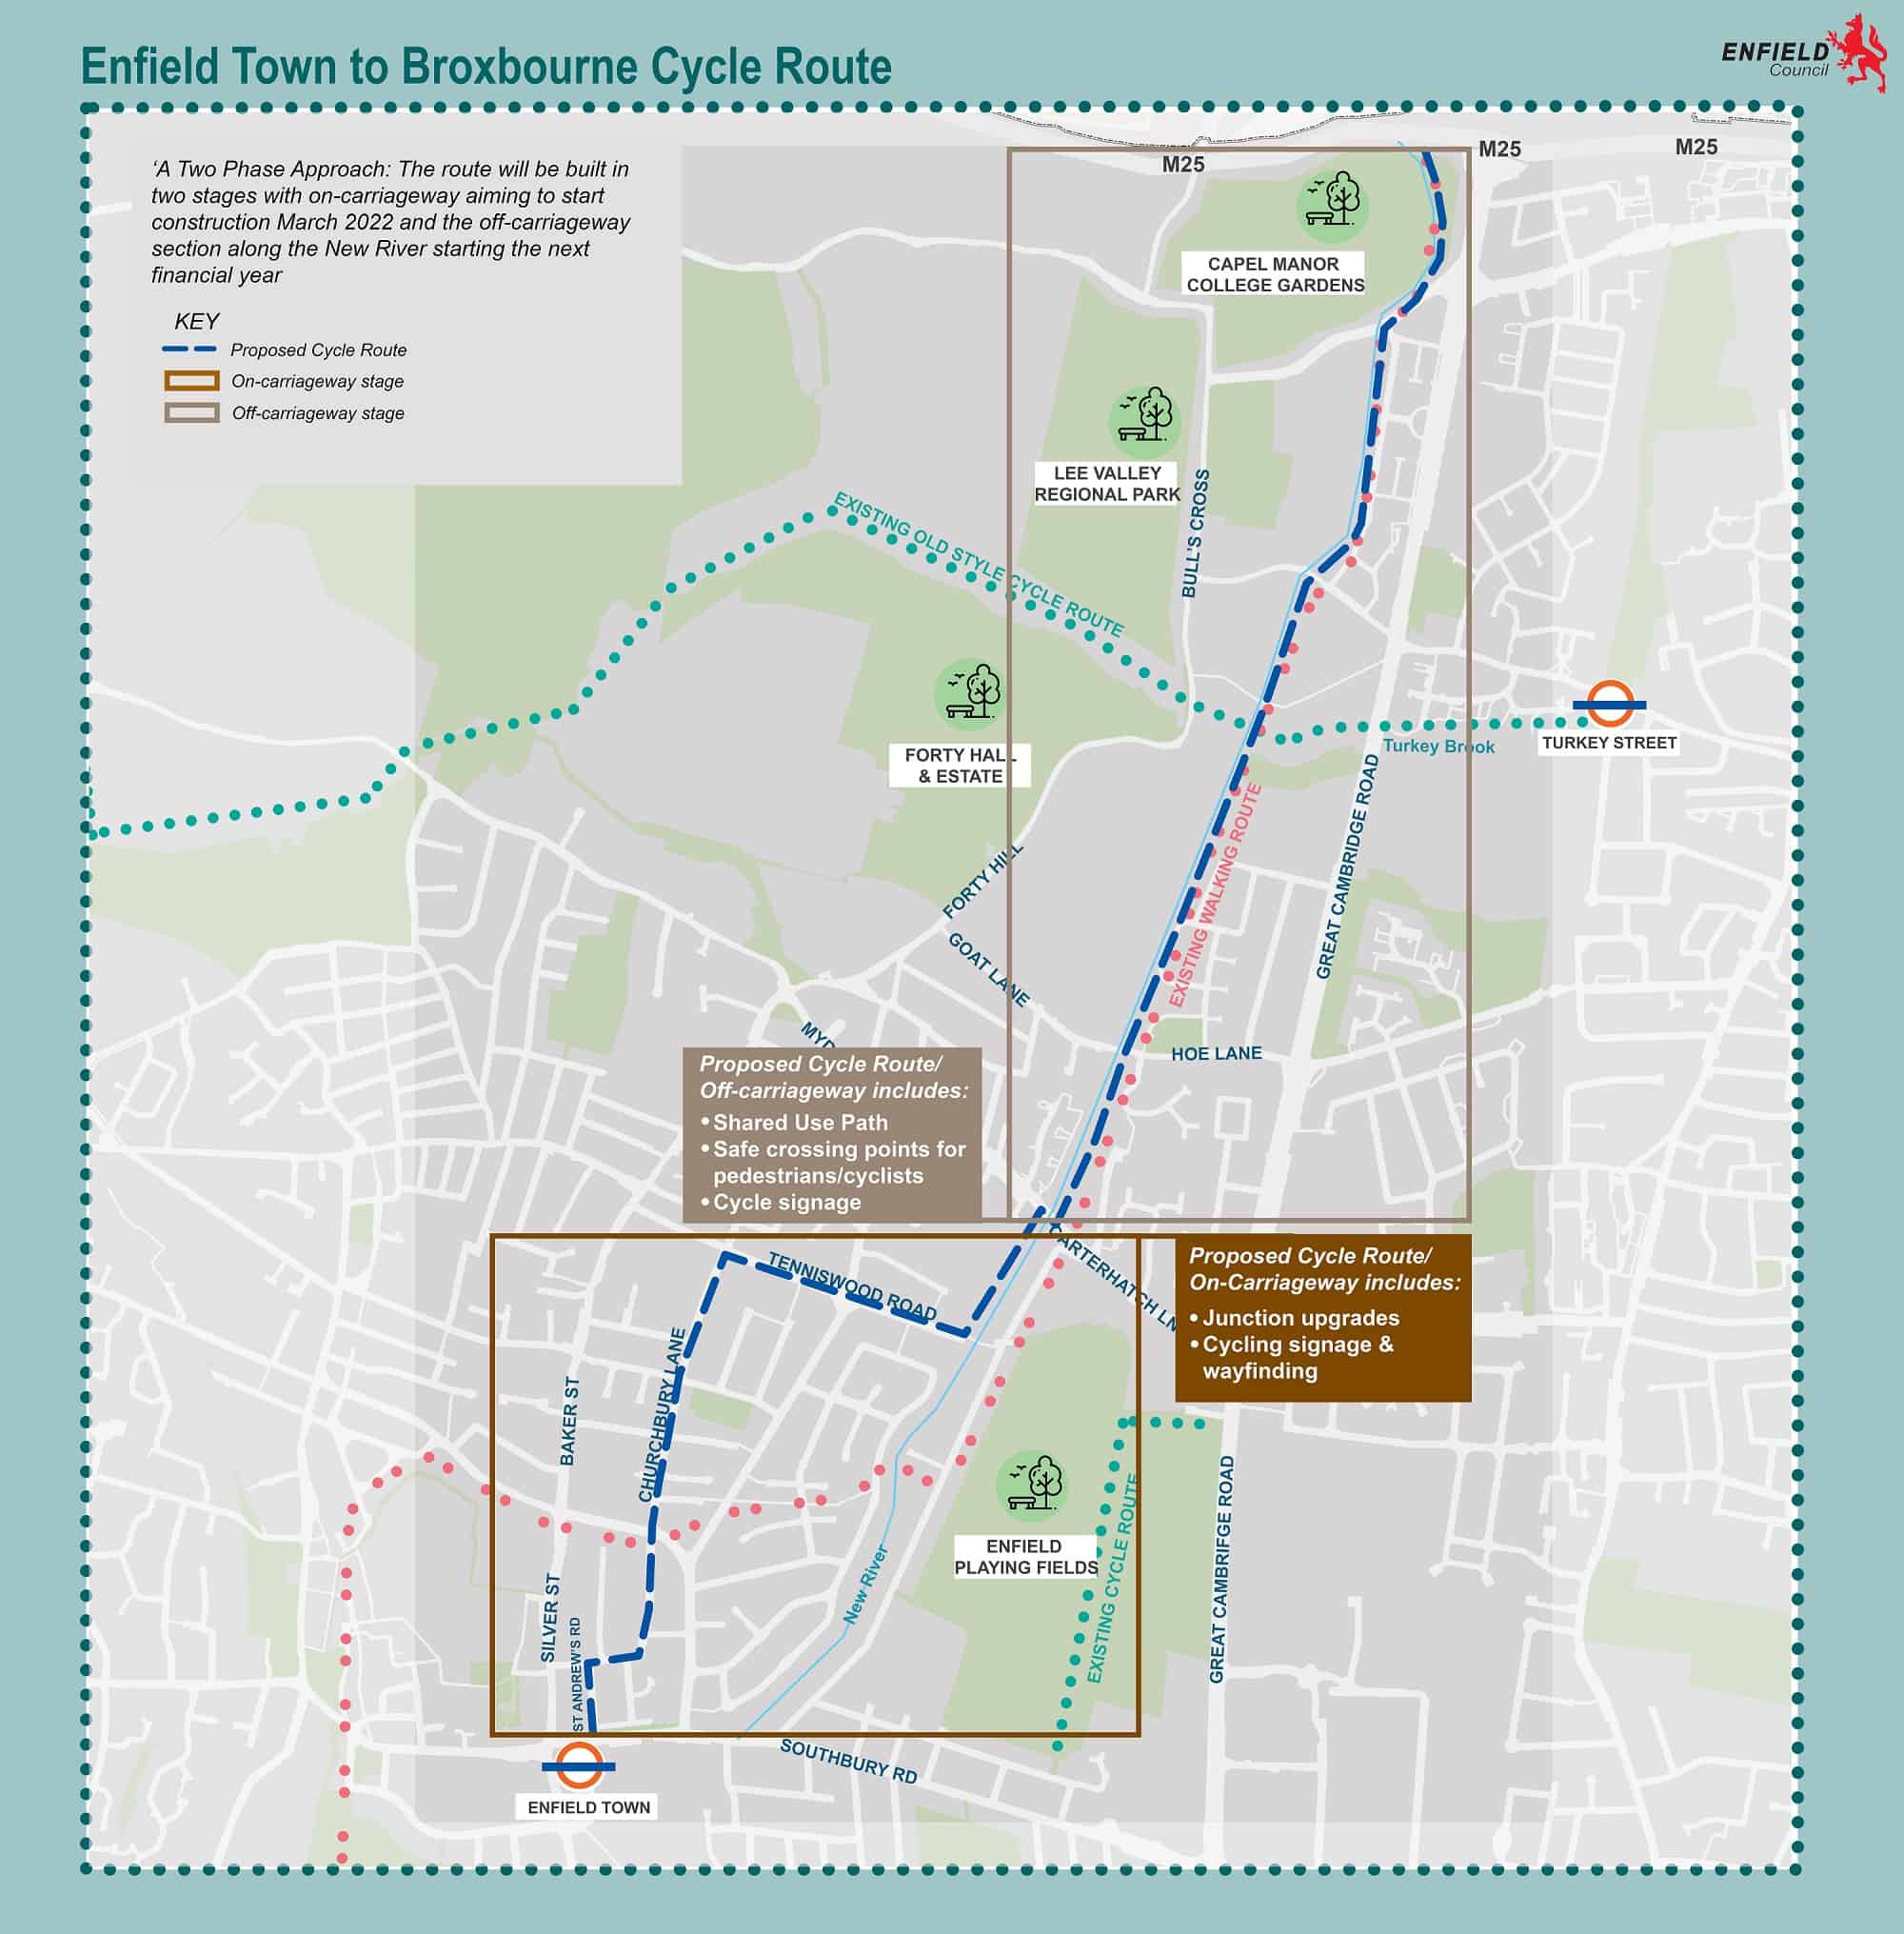 A map of the Enfield Town to Broxbourne cycle route